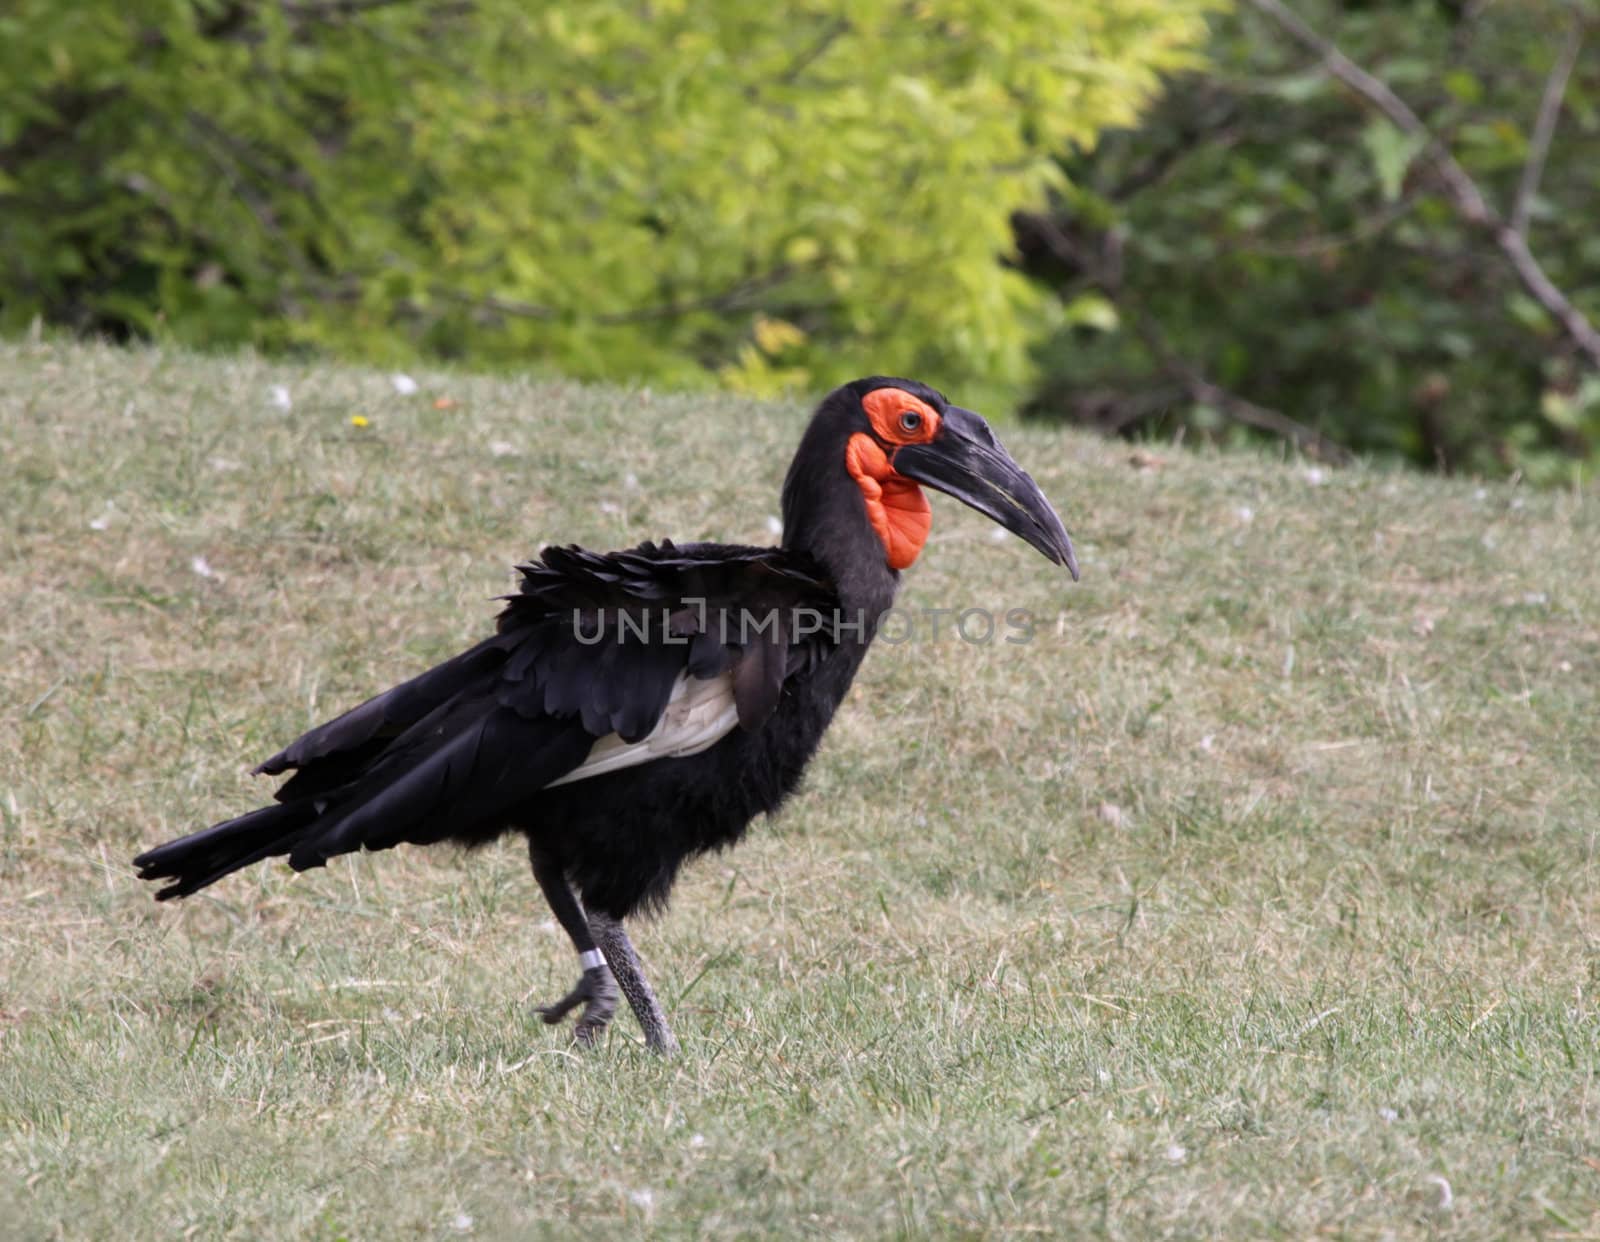 Southern Ground Hornbill by ca2hill